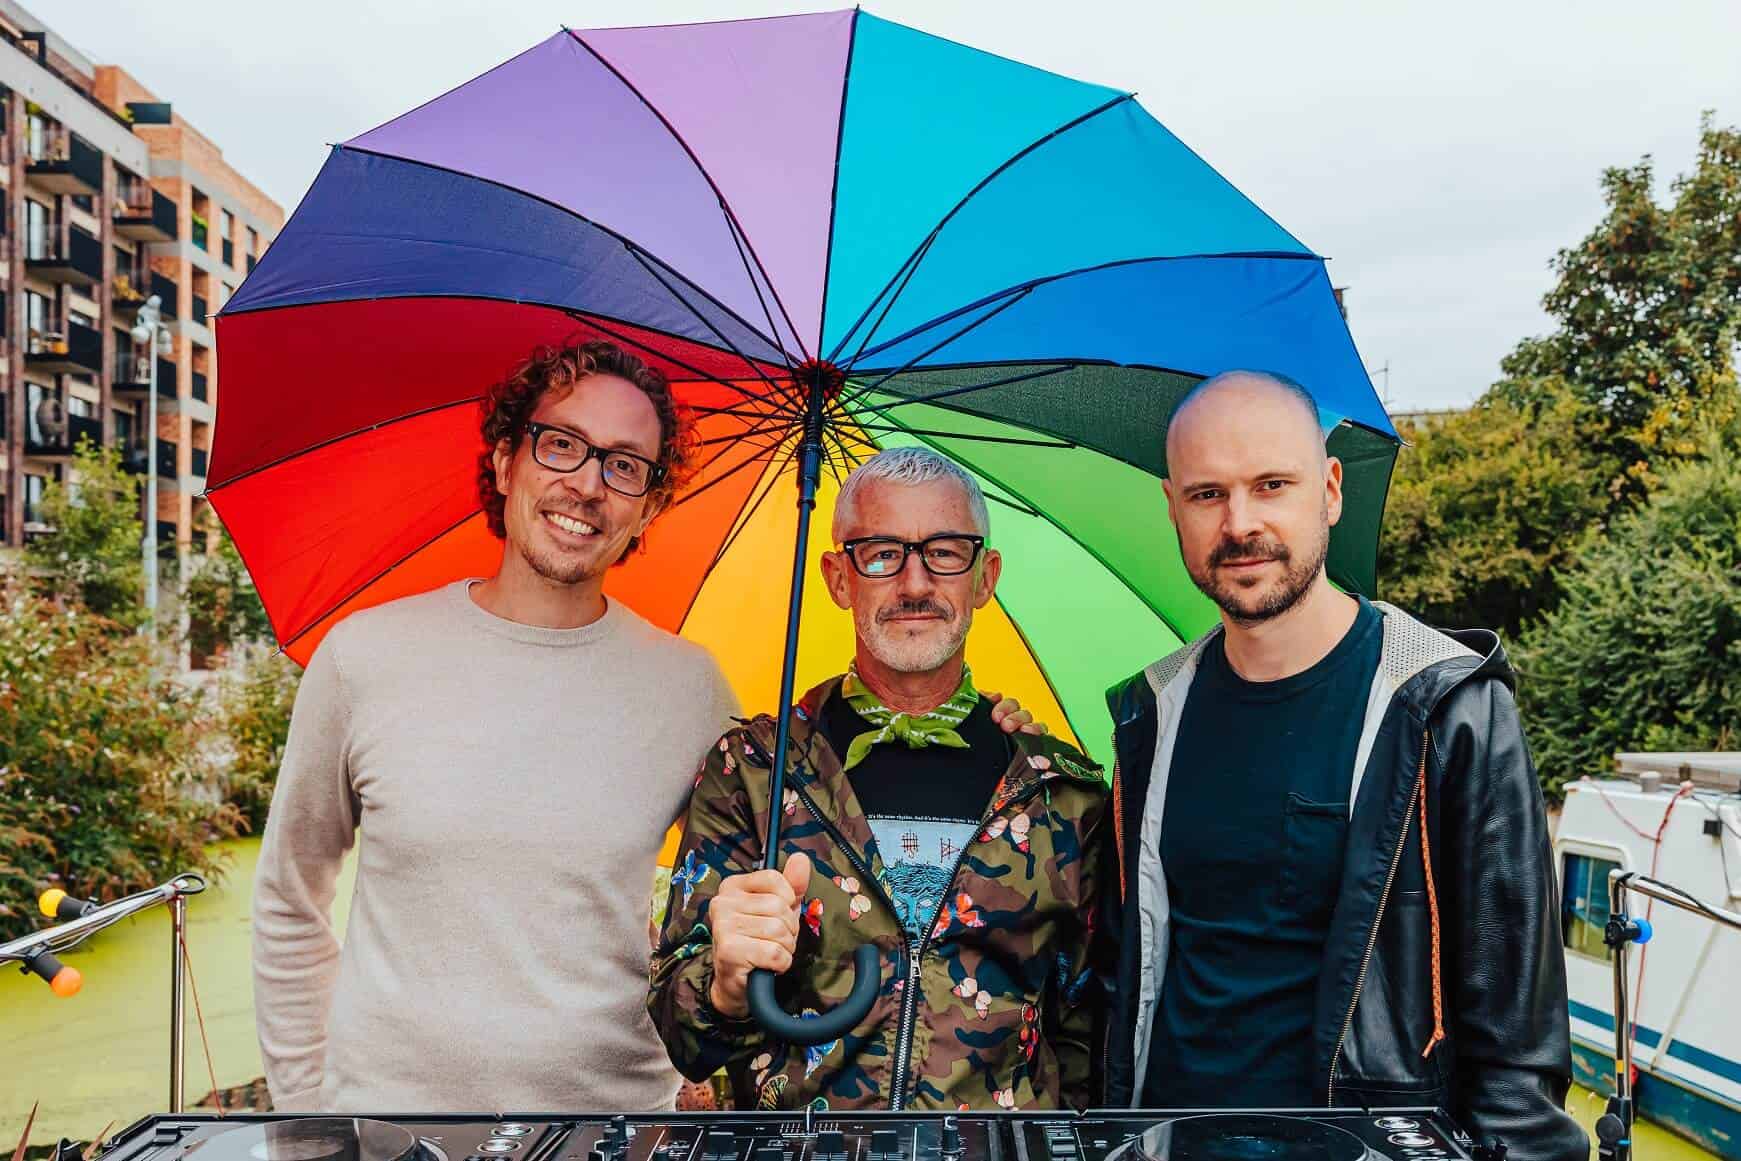 Above & Beyond announce ABGT600 in Mexico City